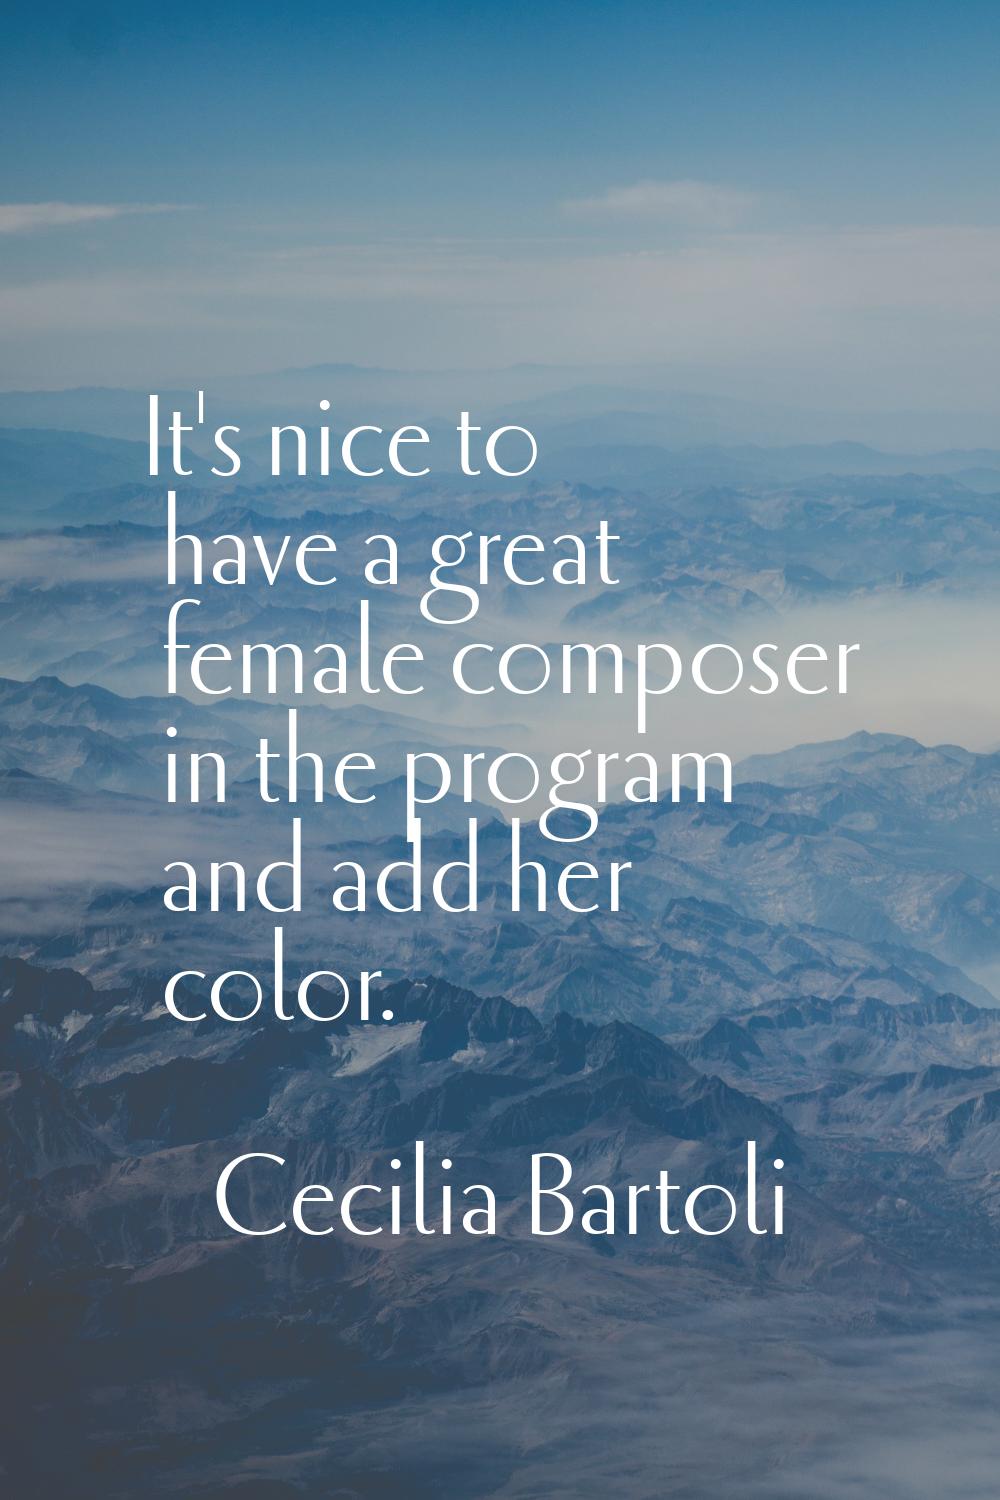 It's nice to have a great female composer in the program and add her color.